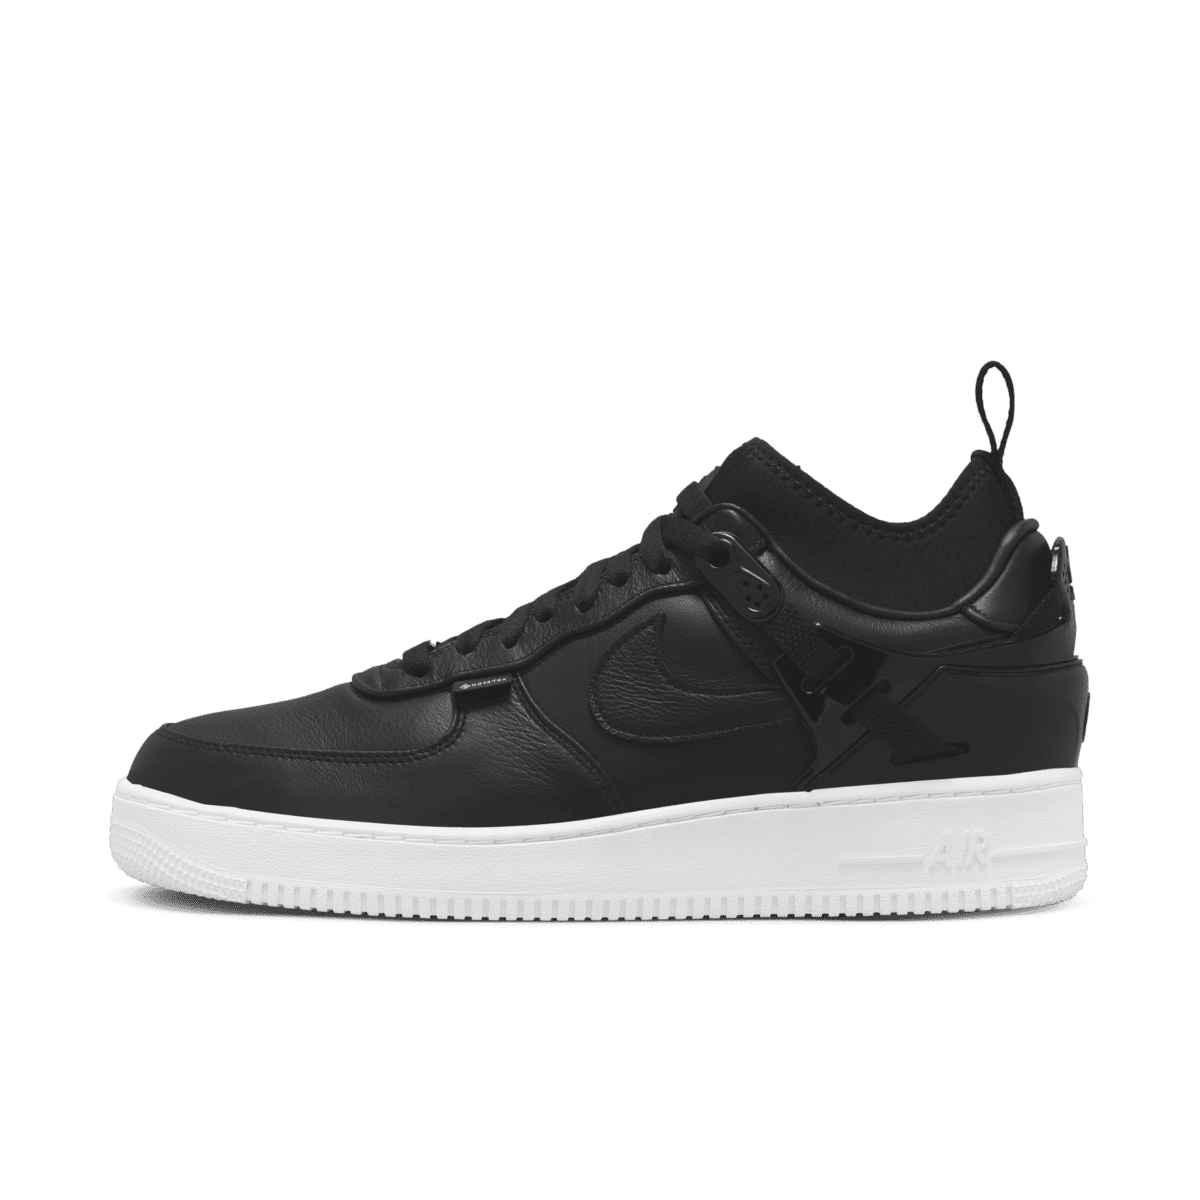 UNDERCOVER x Nike Air Force 1 Low 'Black'